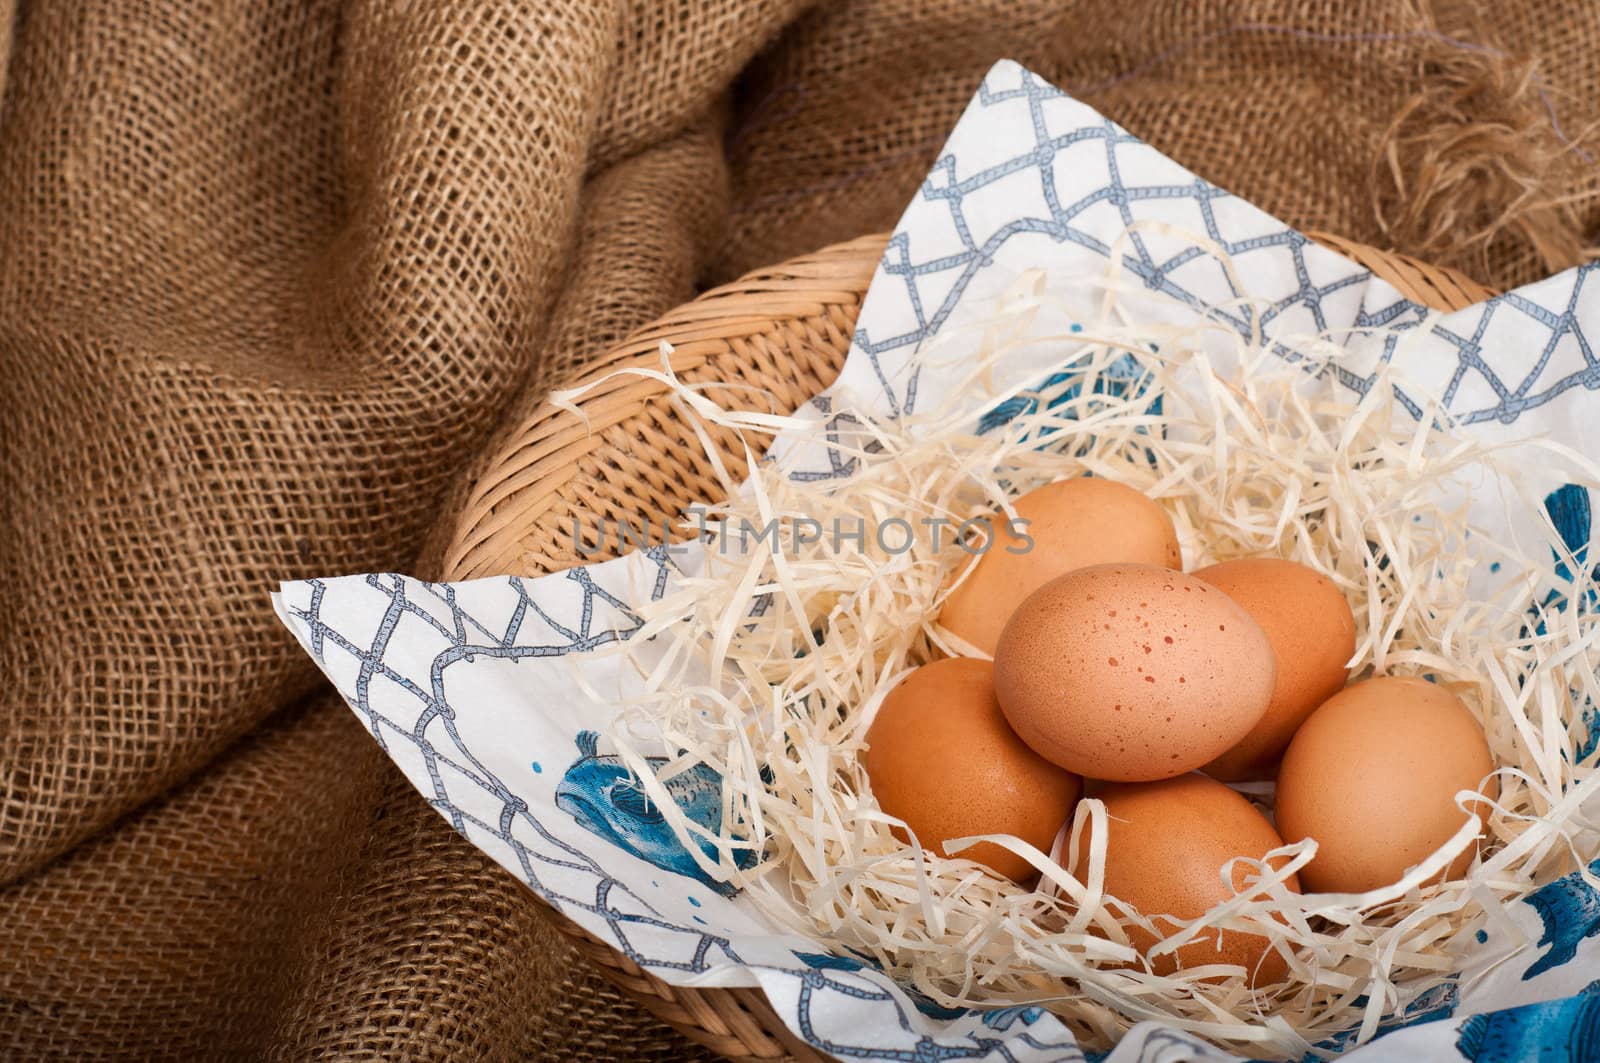 All Your Eggs in One Basket by timh